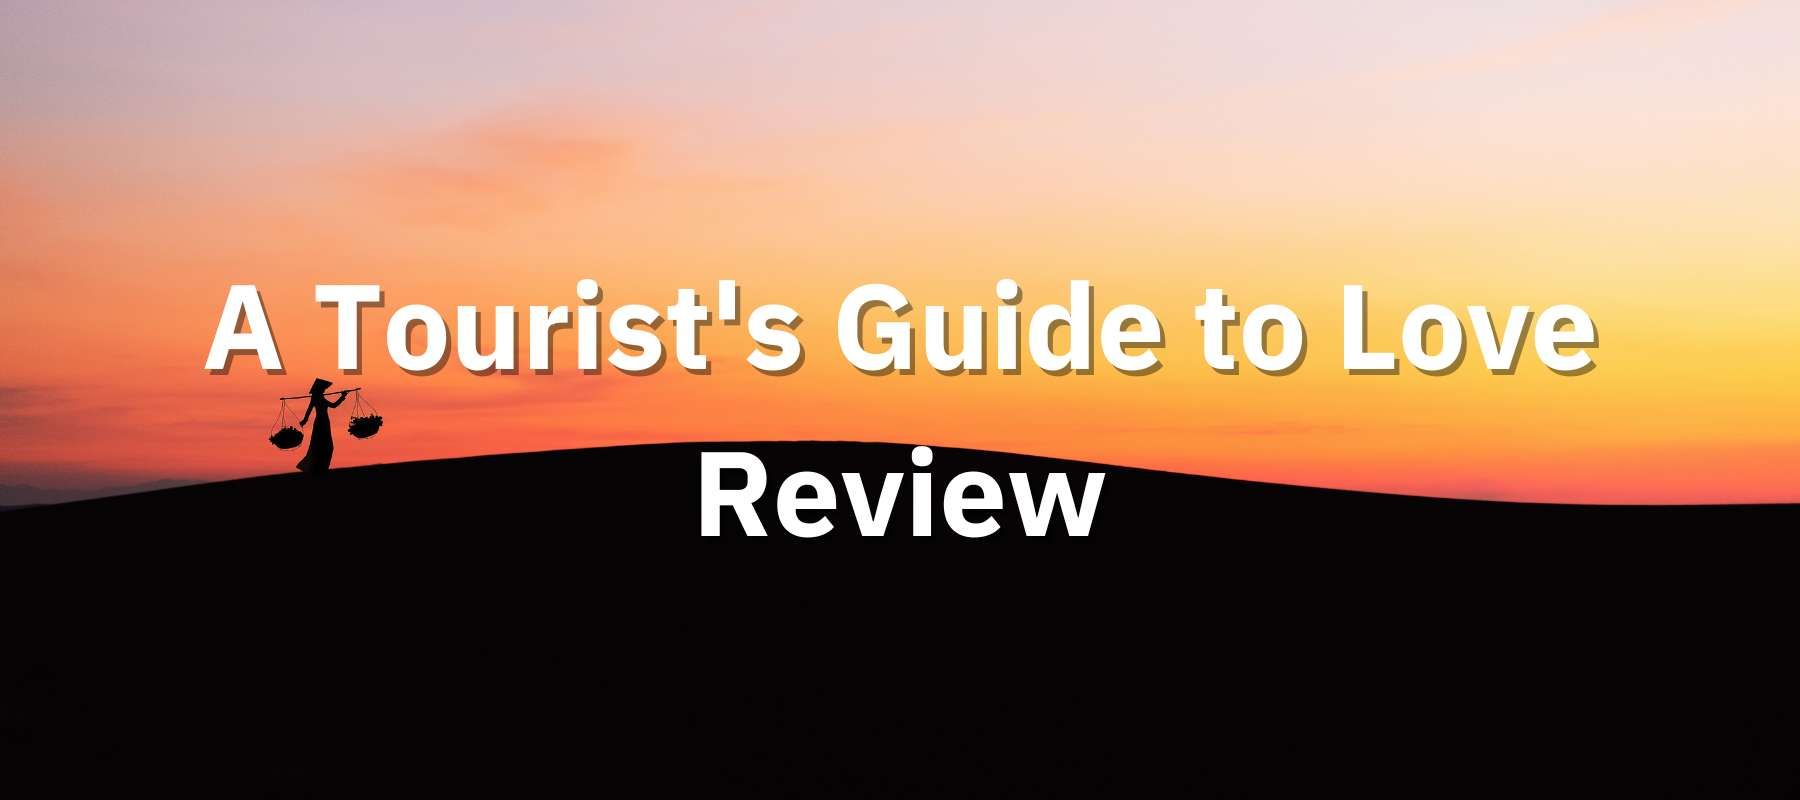 A Tourist's Guide to Love review by MakeYourAsia